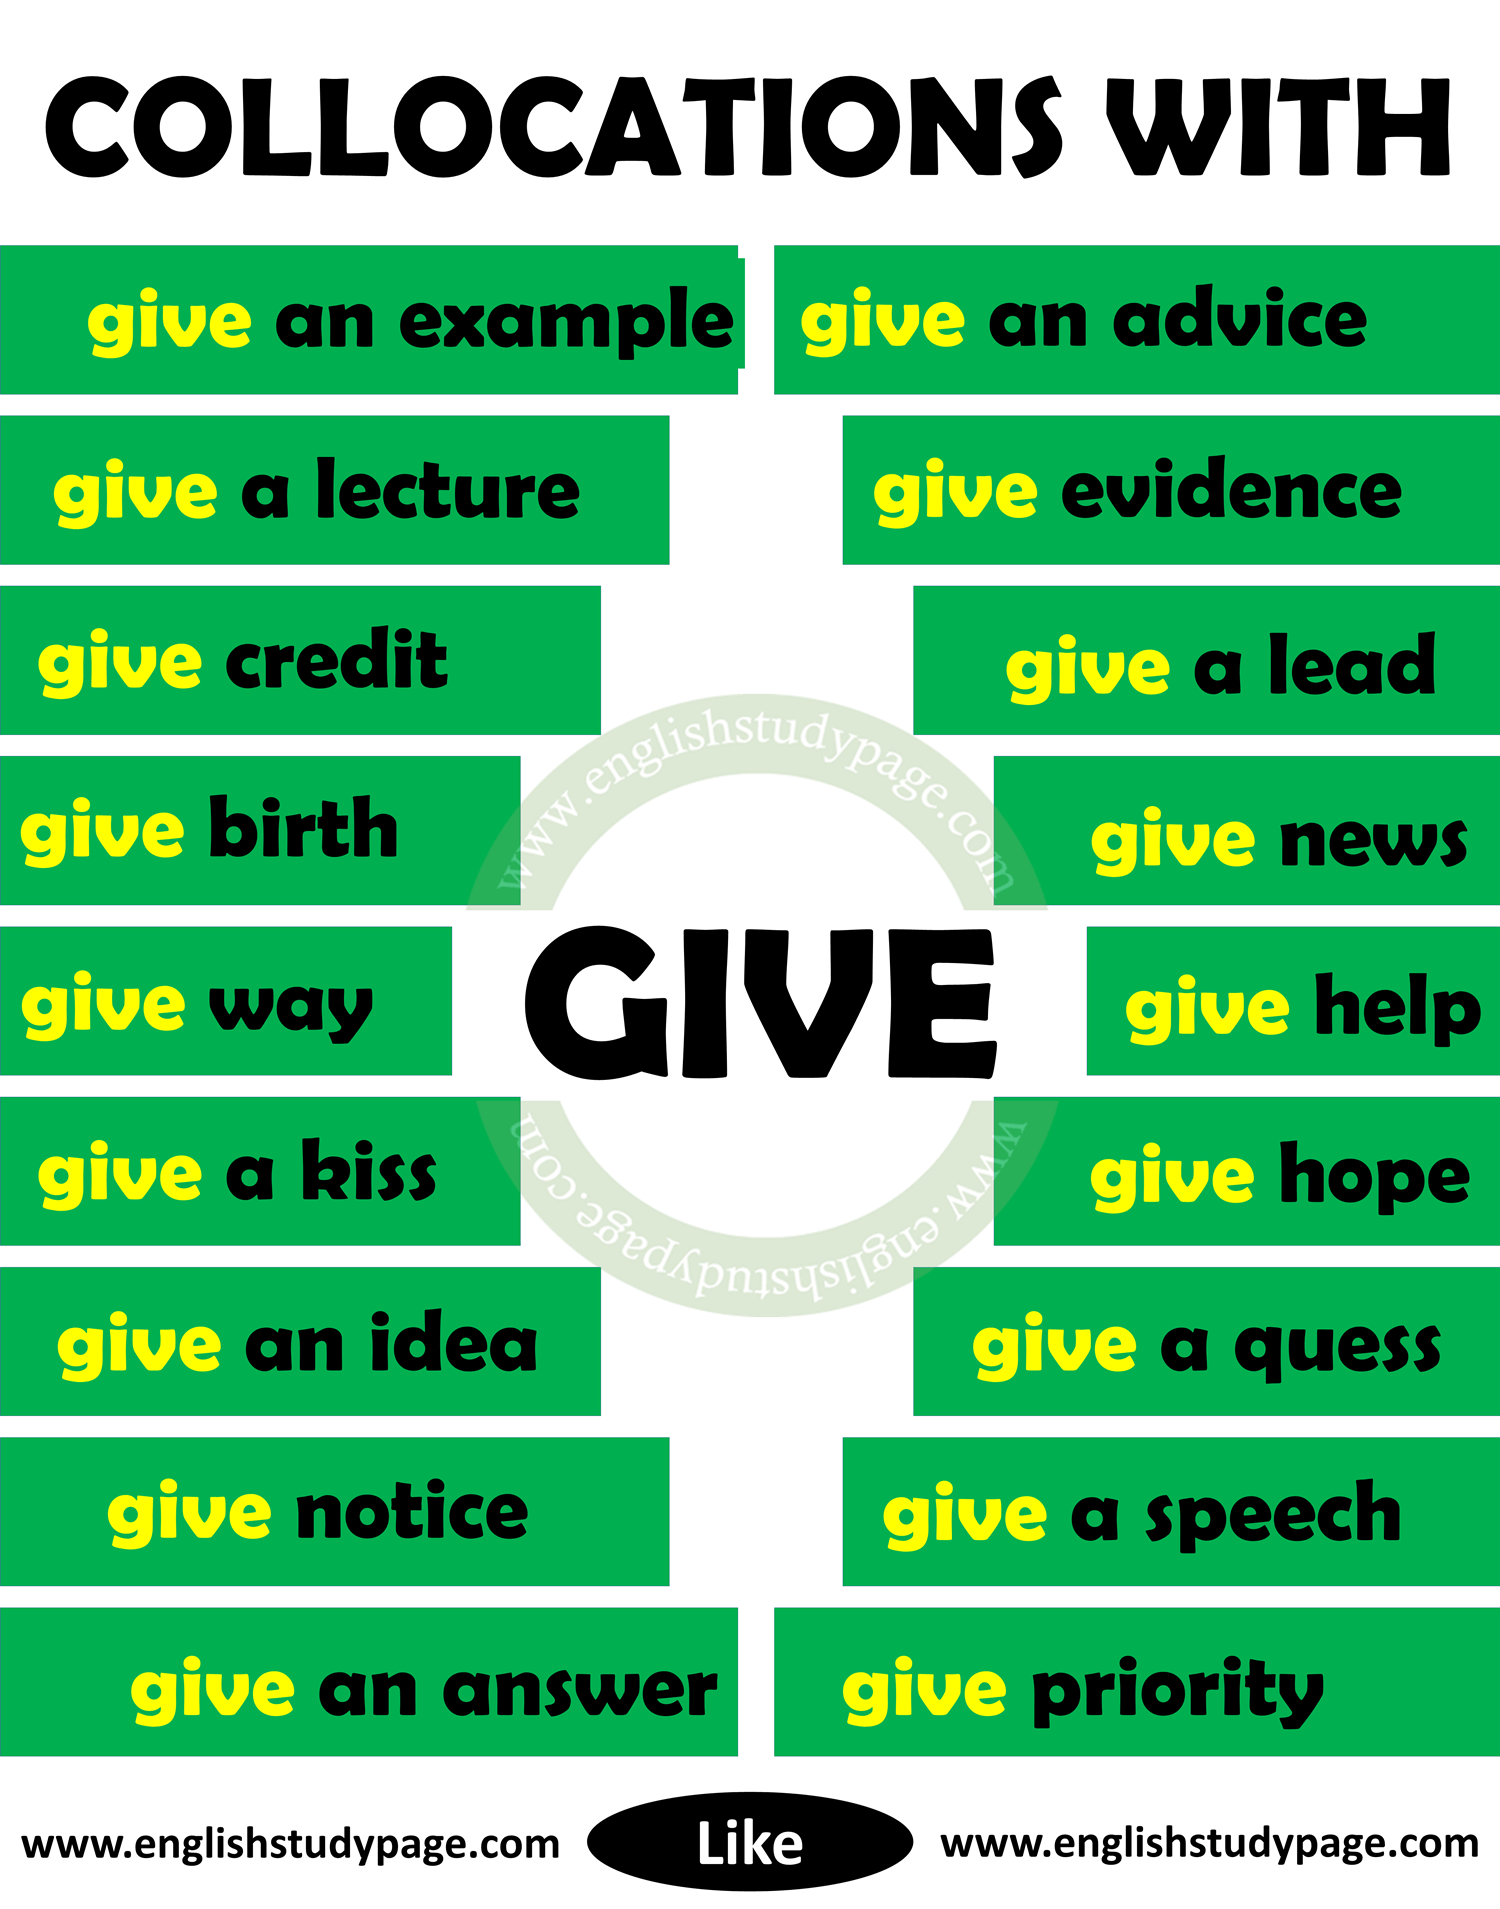 Collocations With GIVE in English